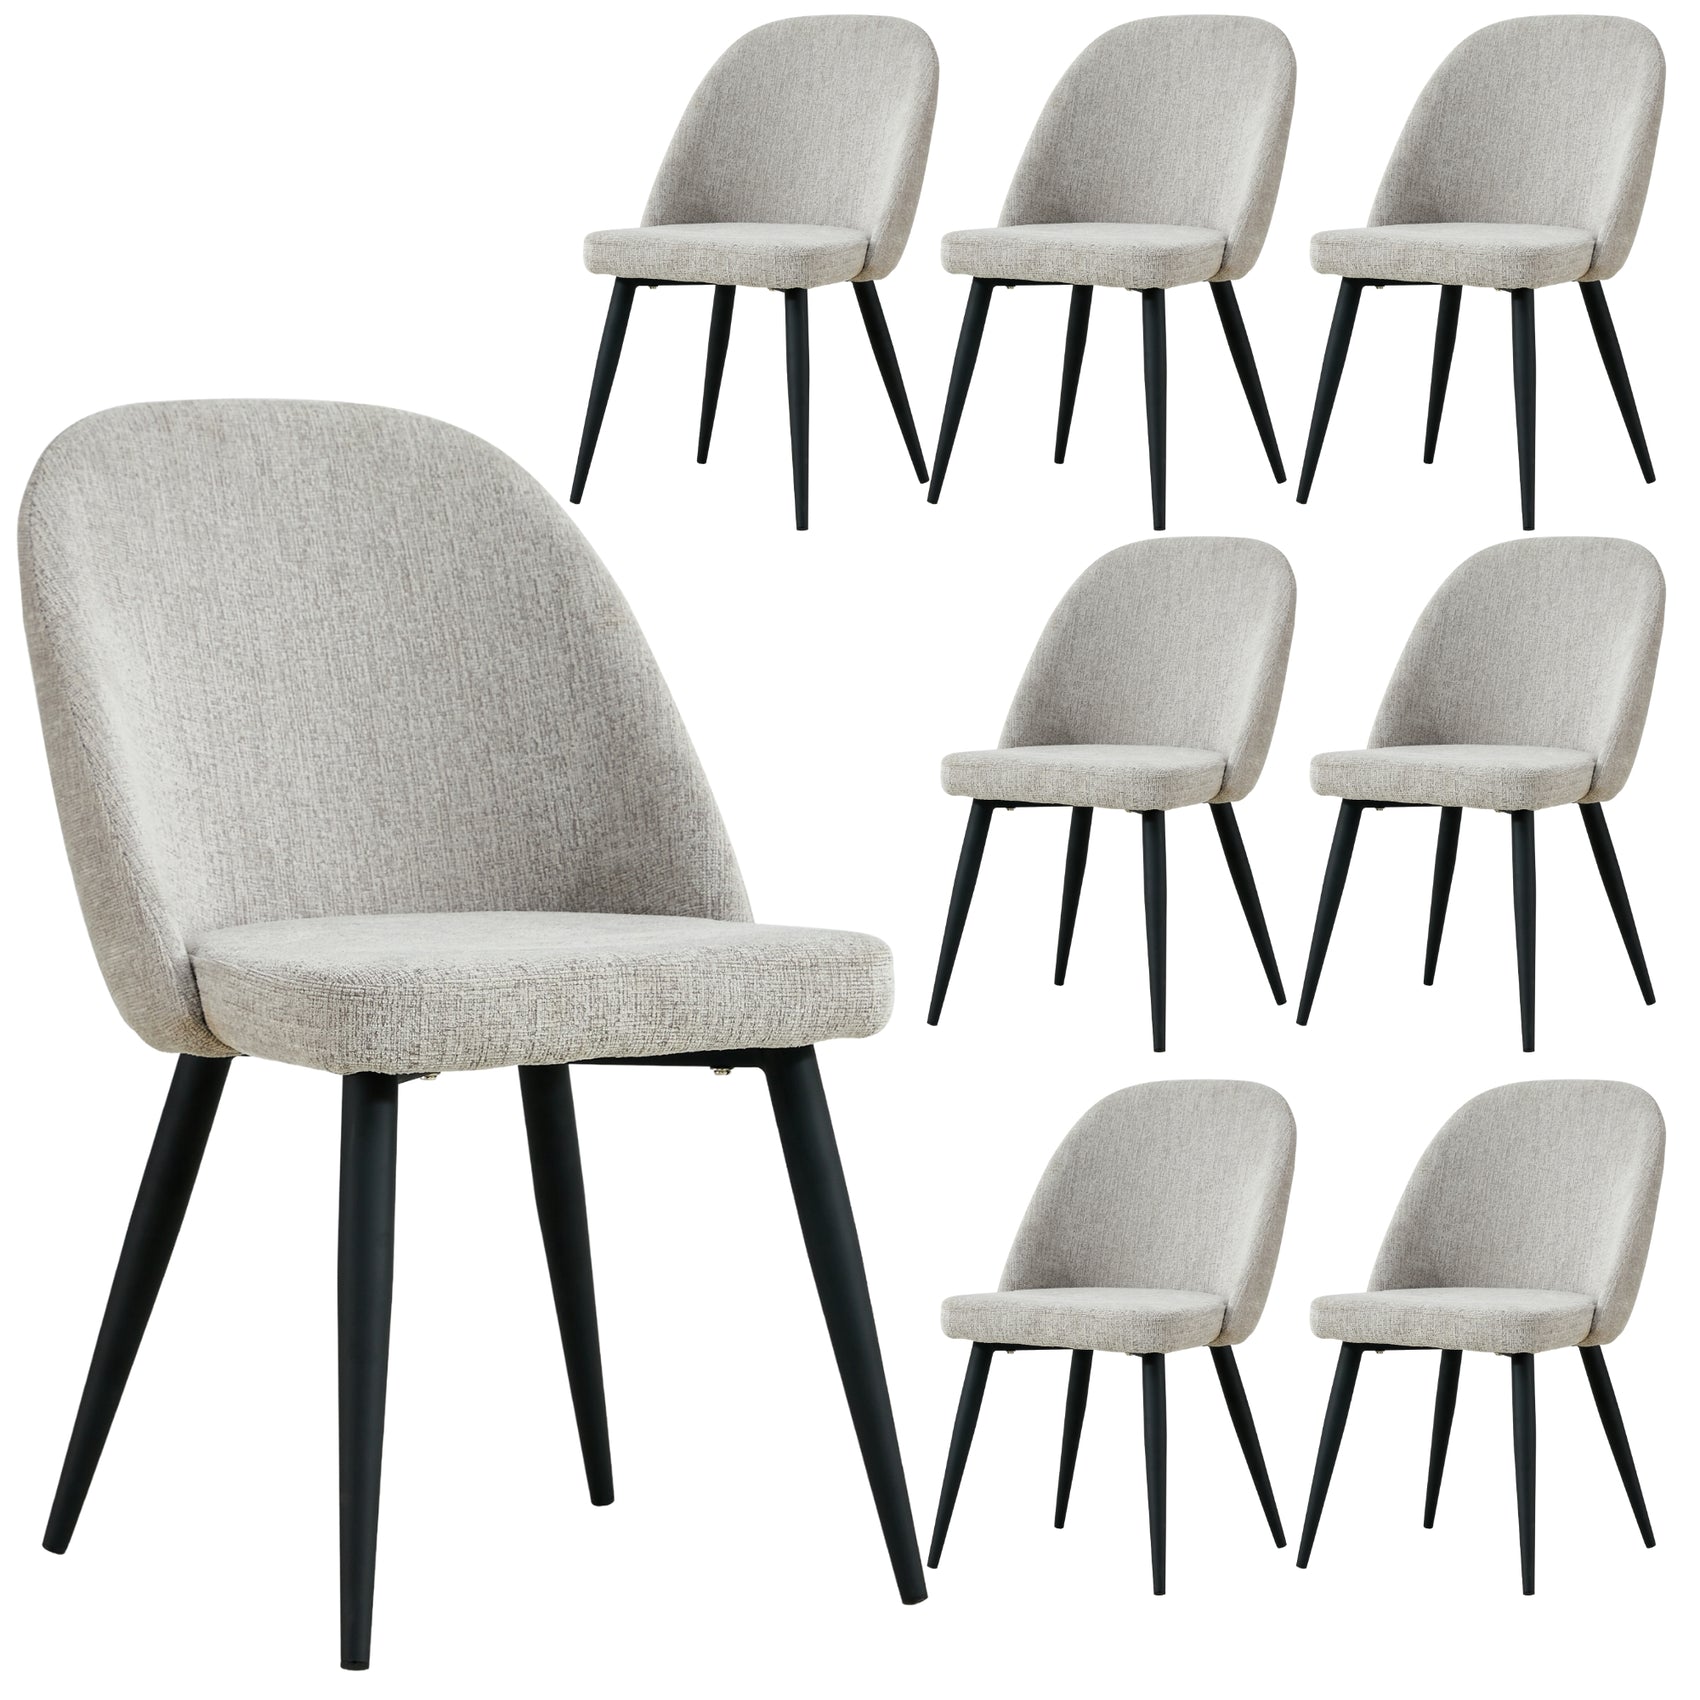 Erin Dining Chair Set of 8 Fabric Seat with Metal Frame - Quartz